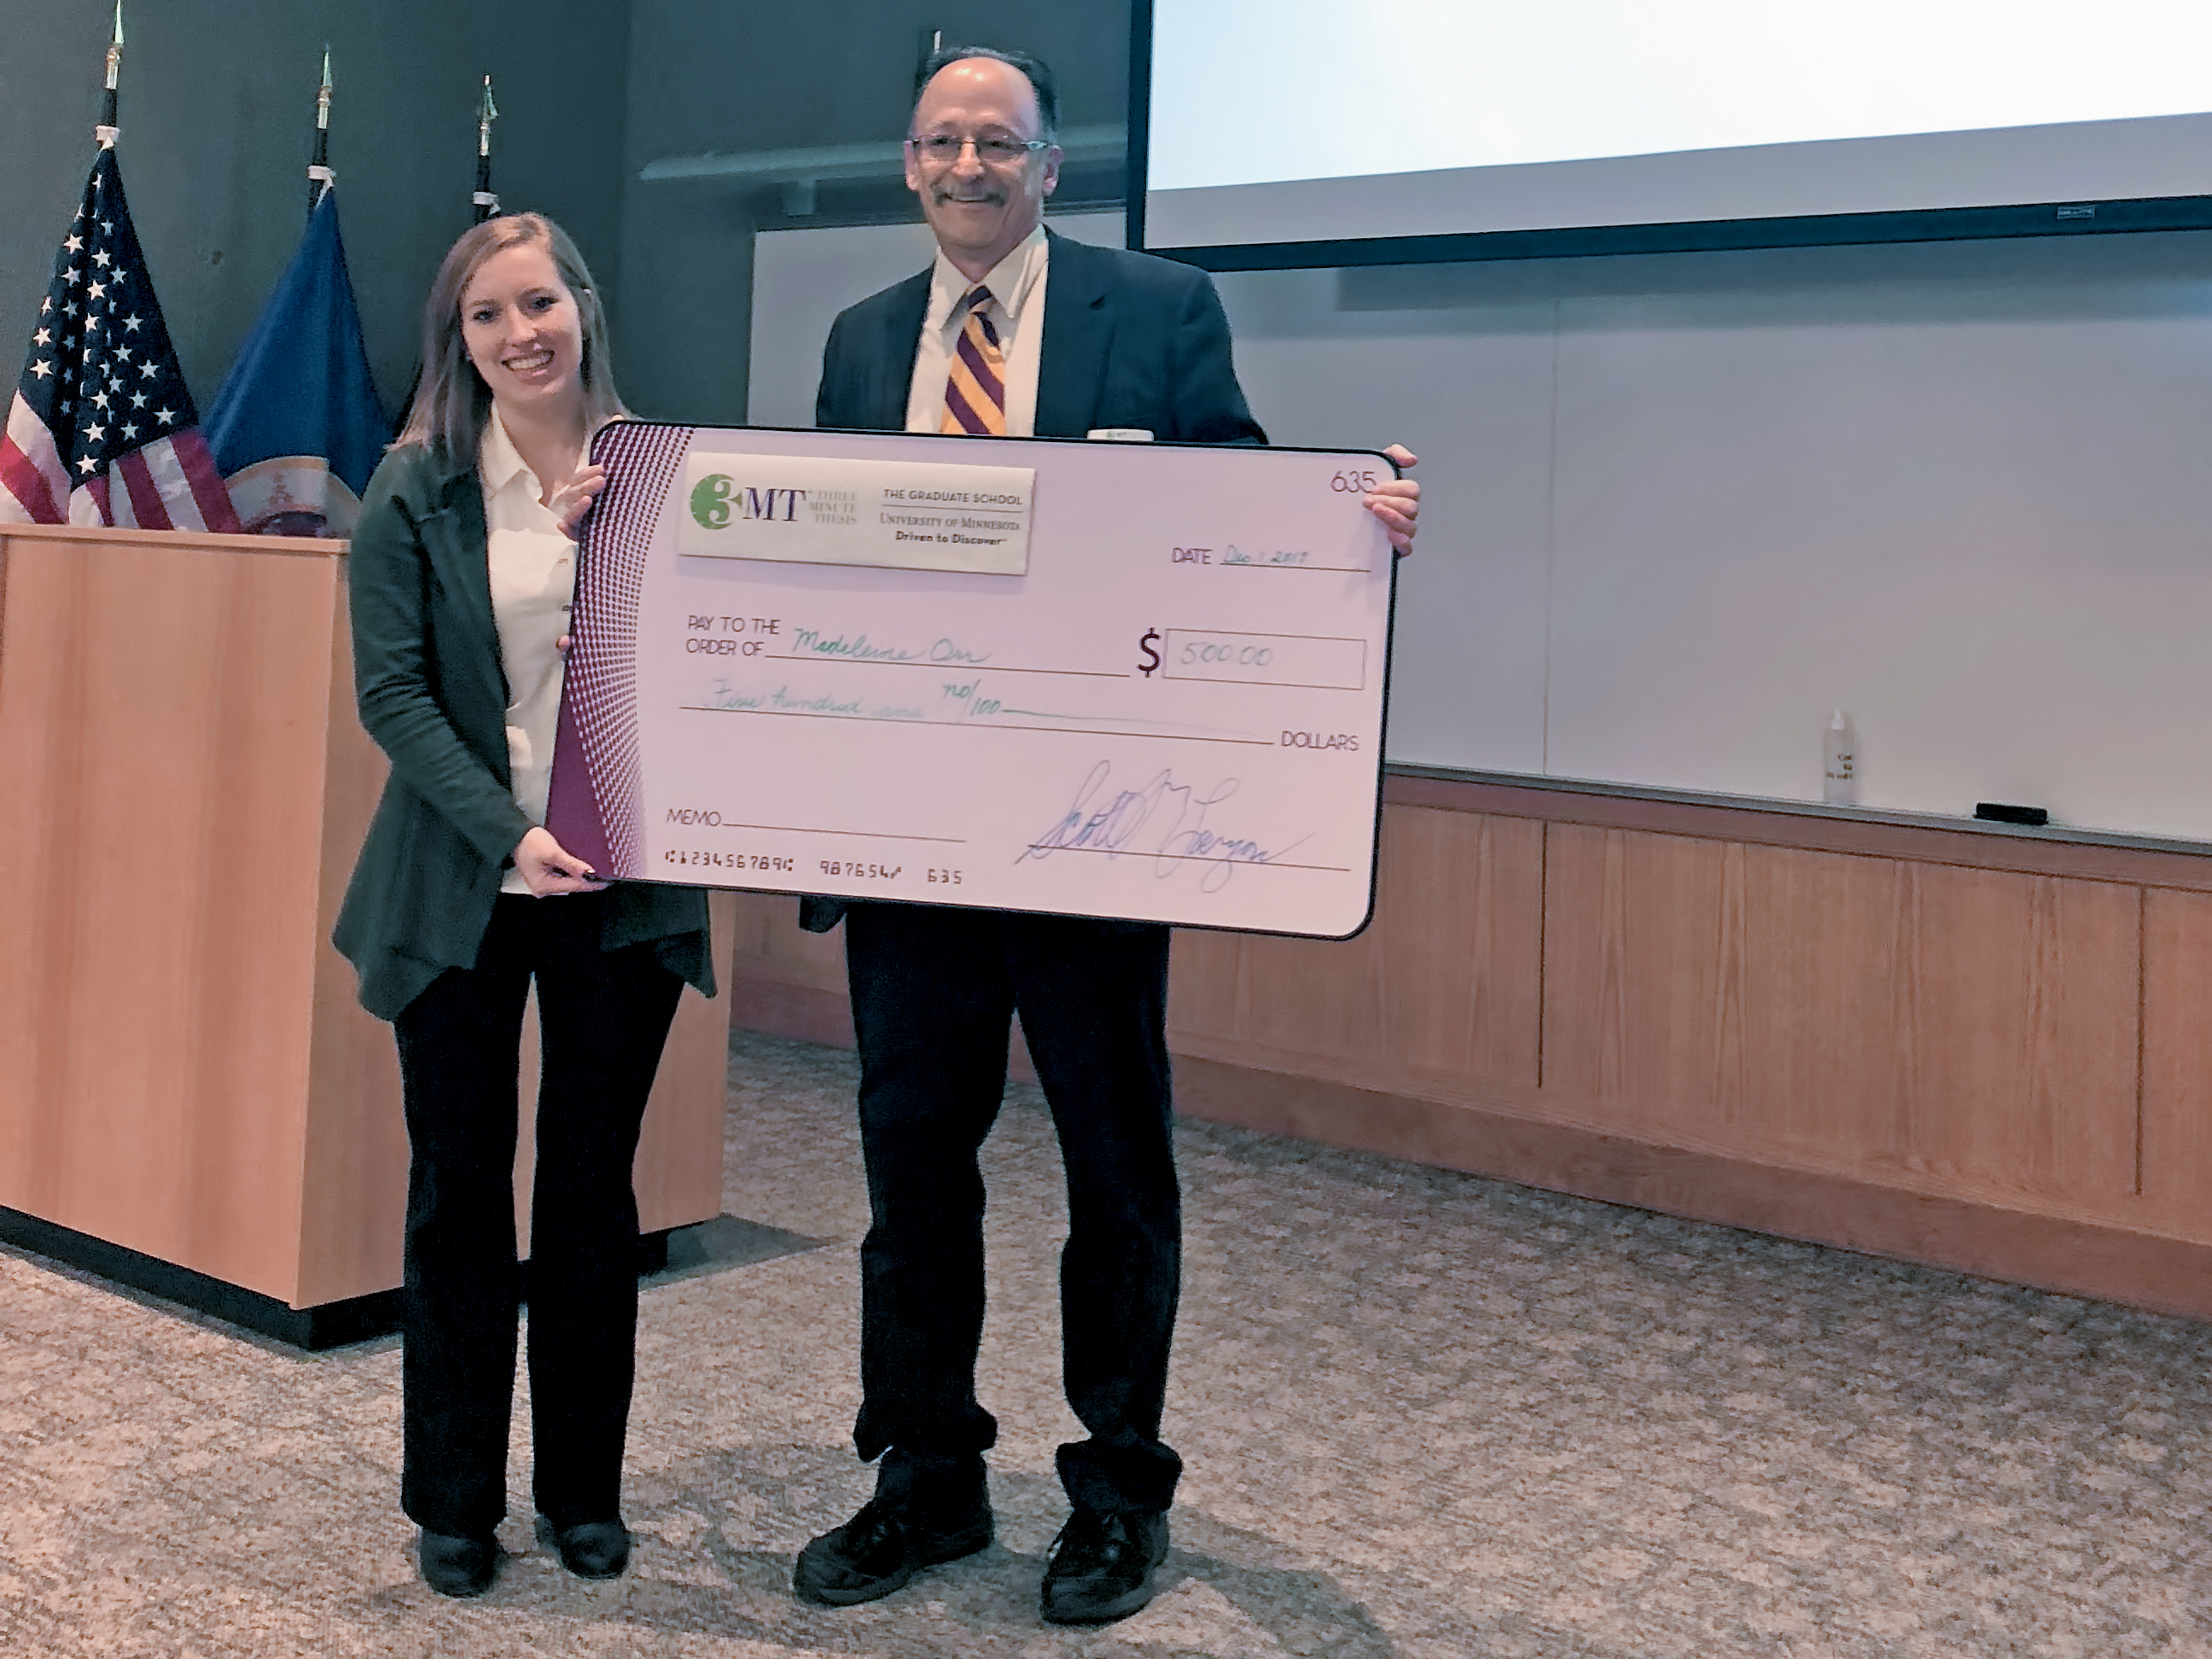 3MT winner Madeline Orr accepted a check from Graduate School dean Scott Lanyon